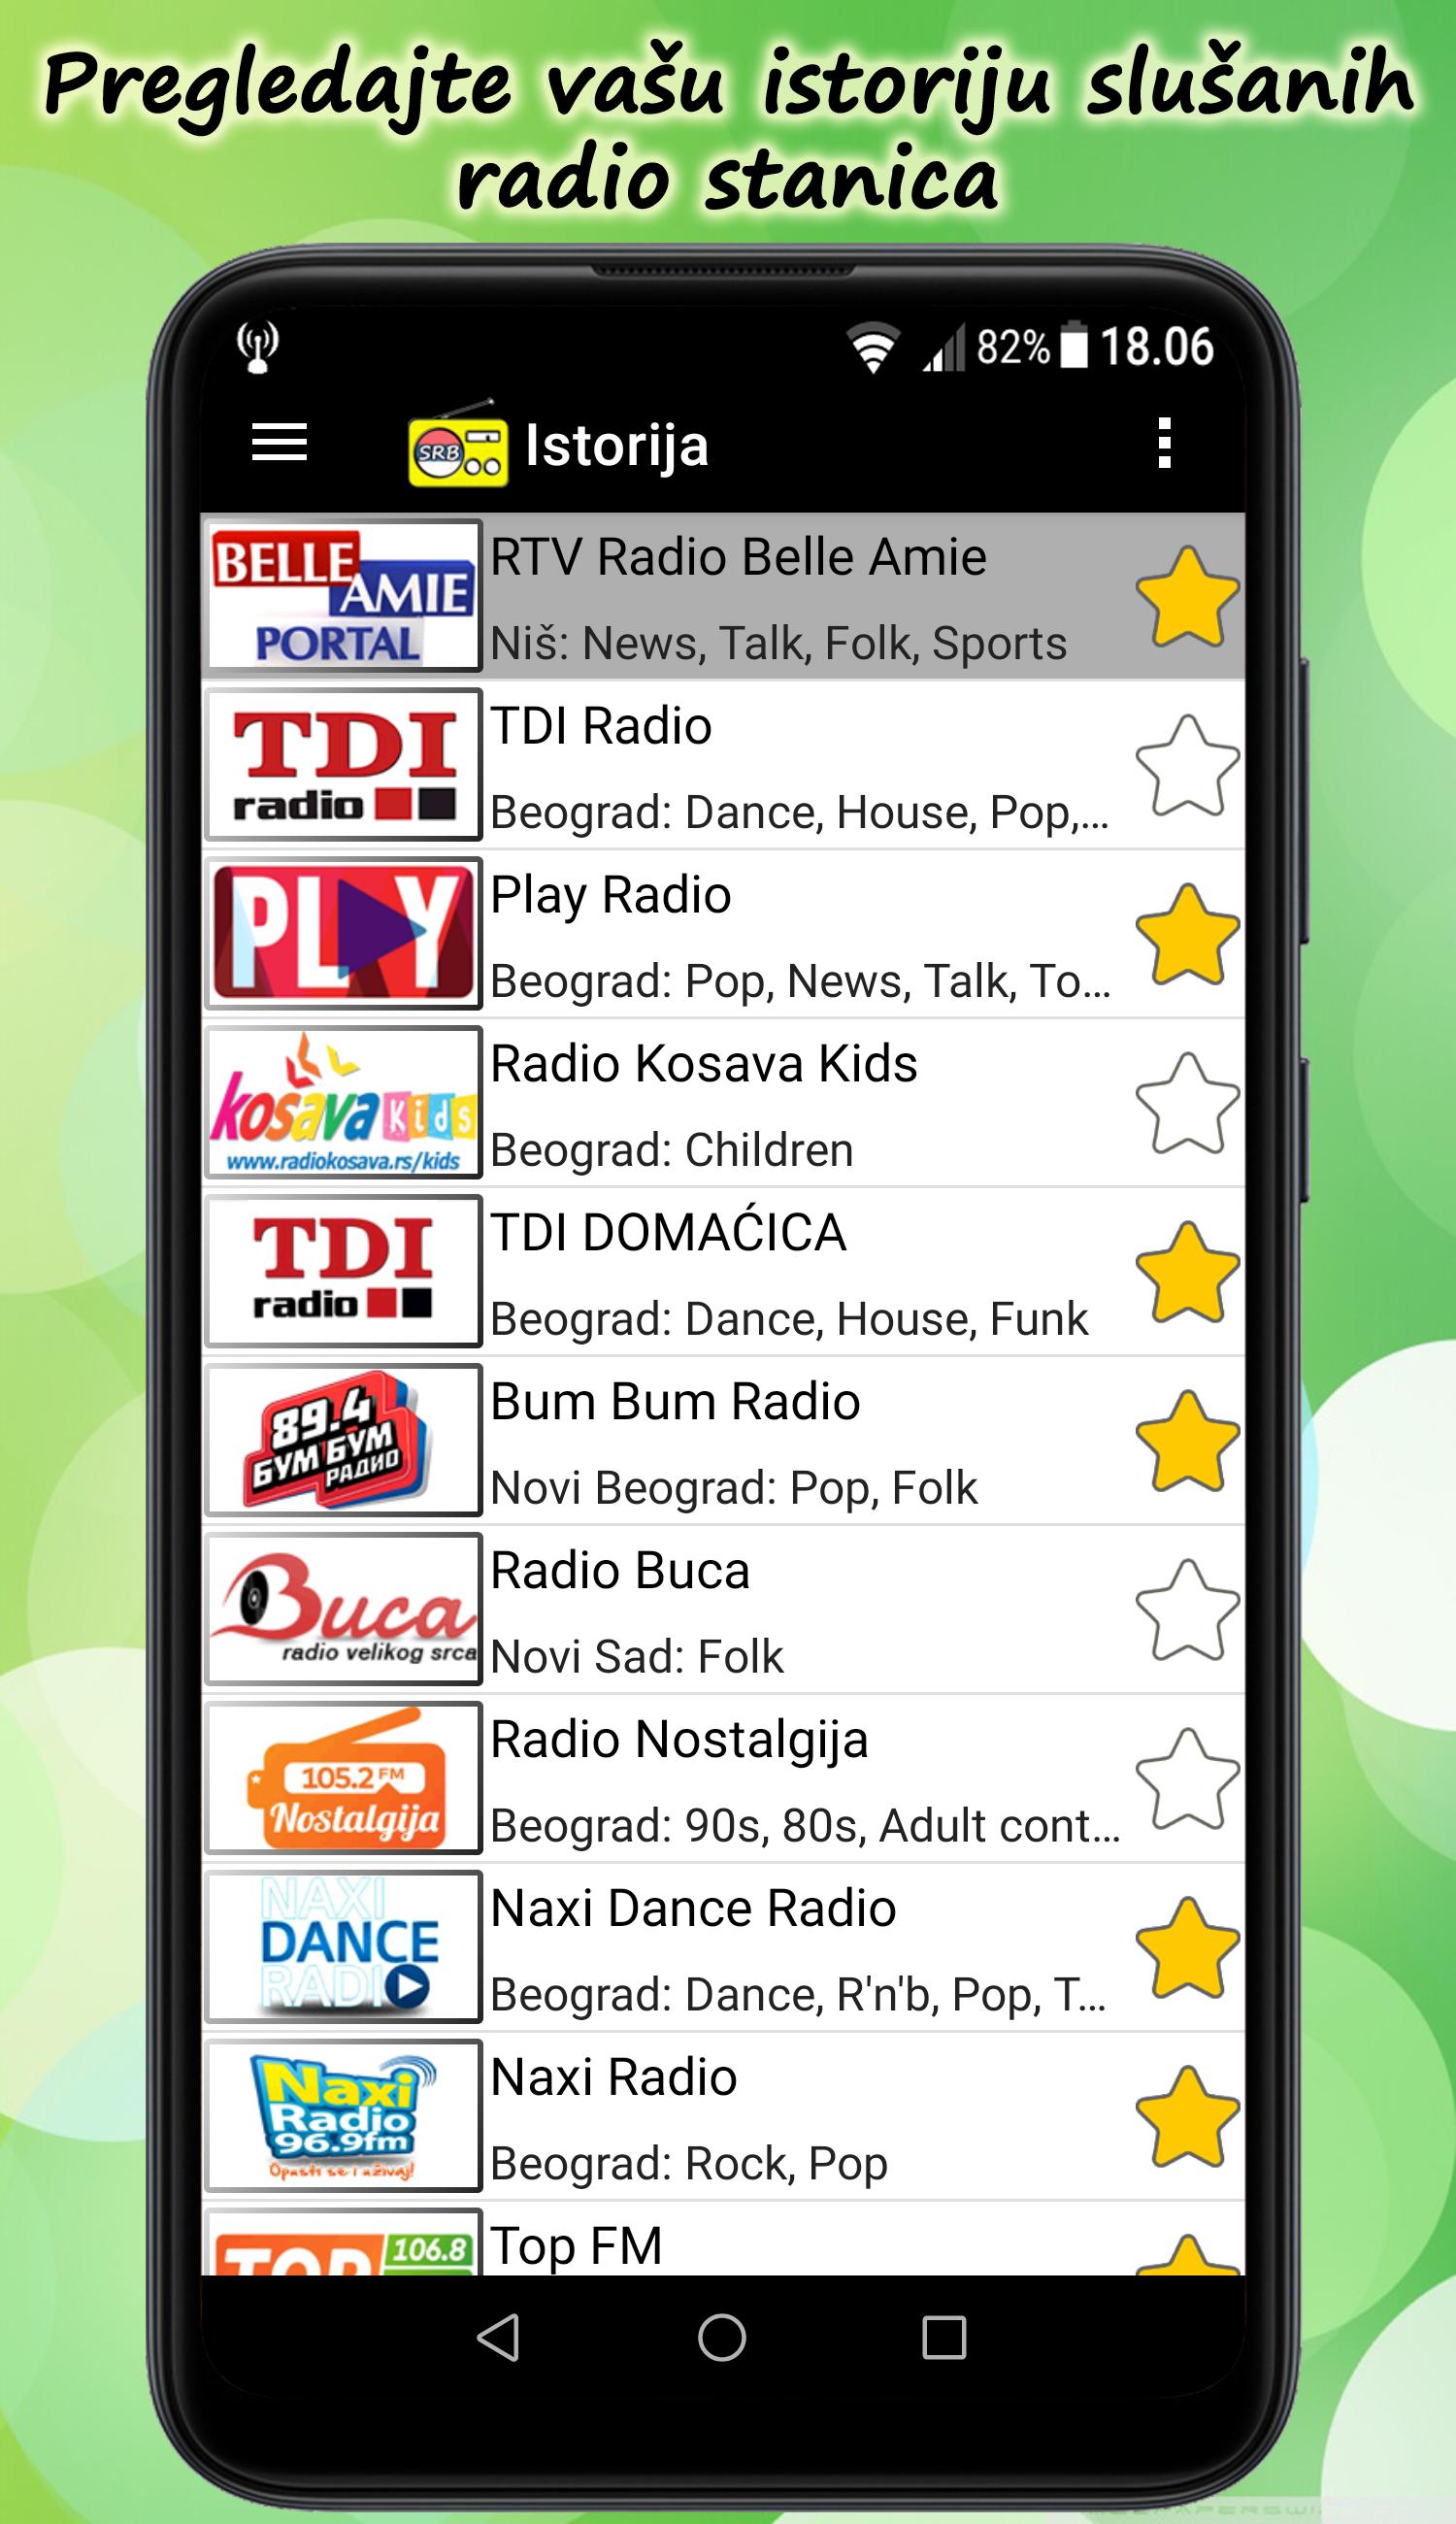 Radio Serbia FM Online for Android - APK Download